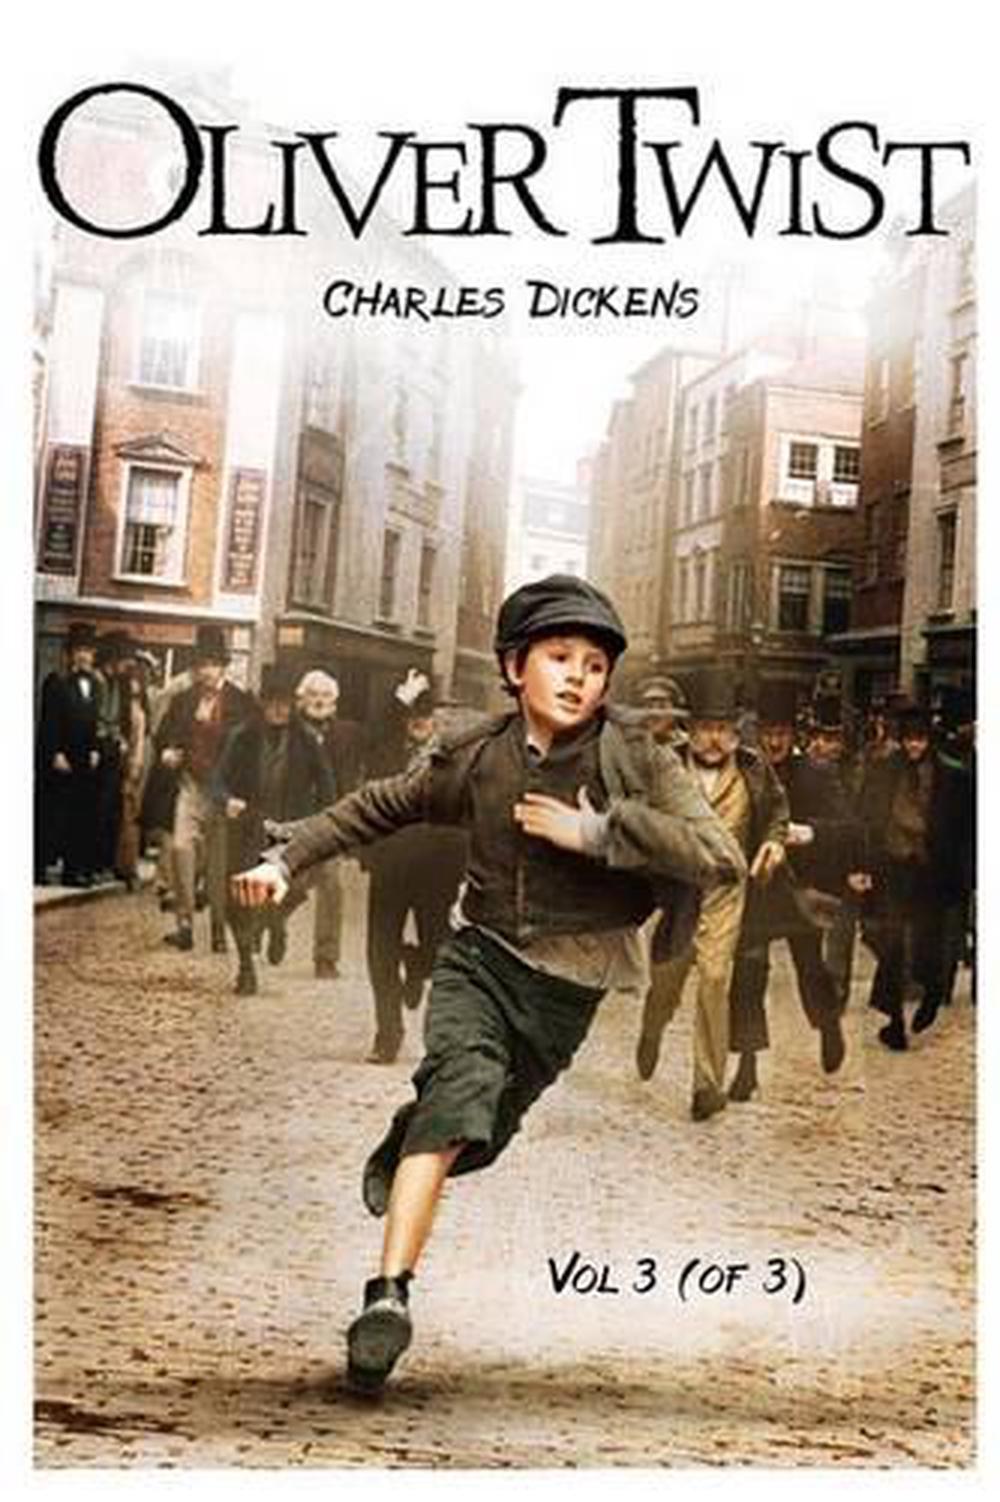 a book review about oliver twist